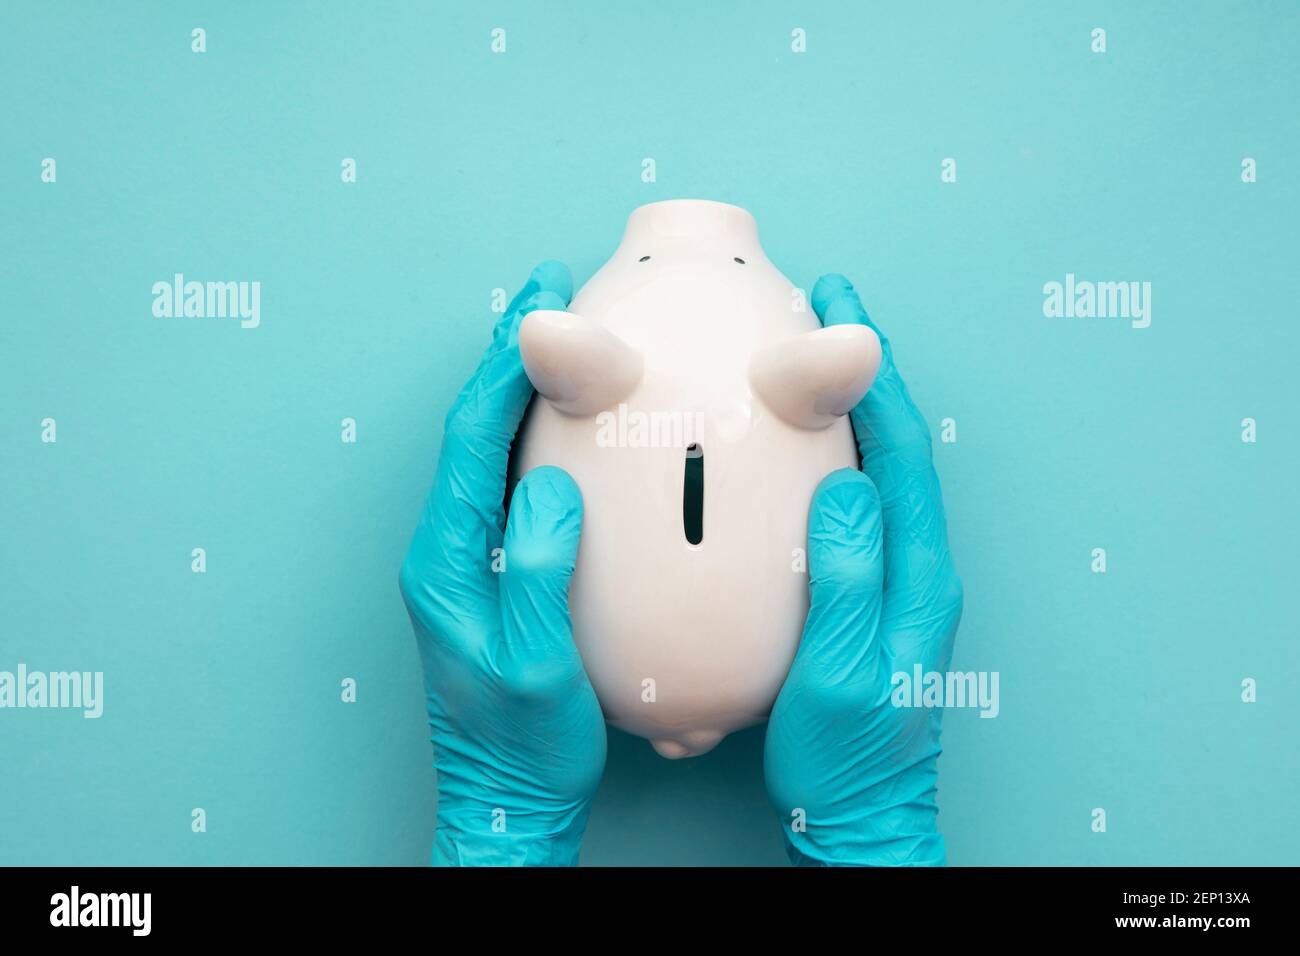 Health care cost. Doctor in surgical gloves holding a white piggy bank Stock Photo